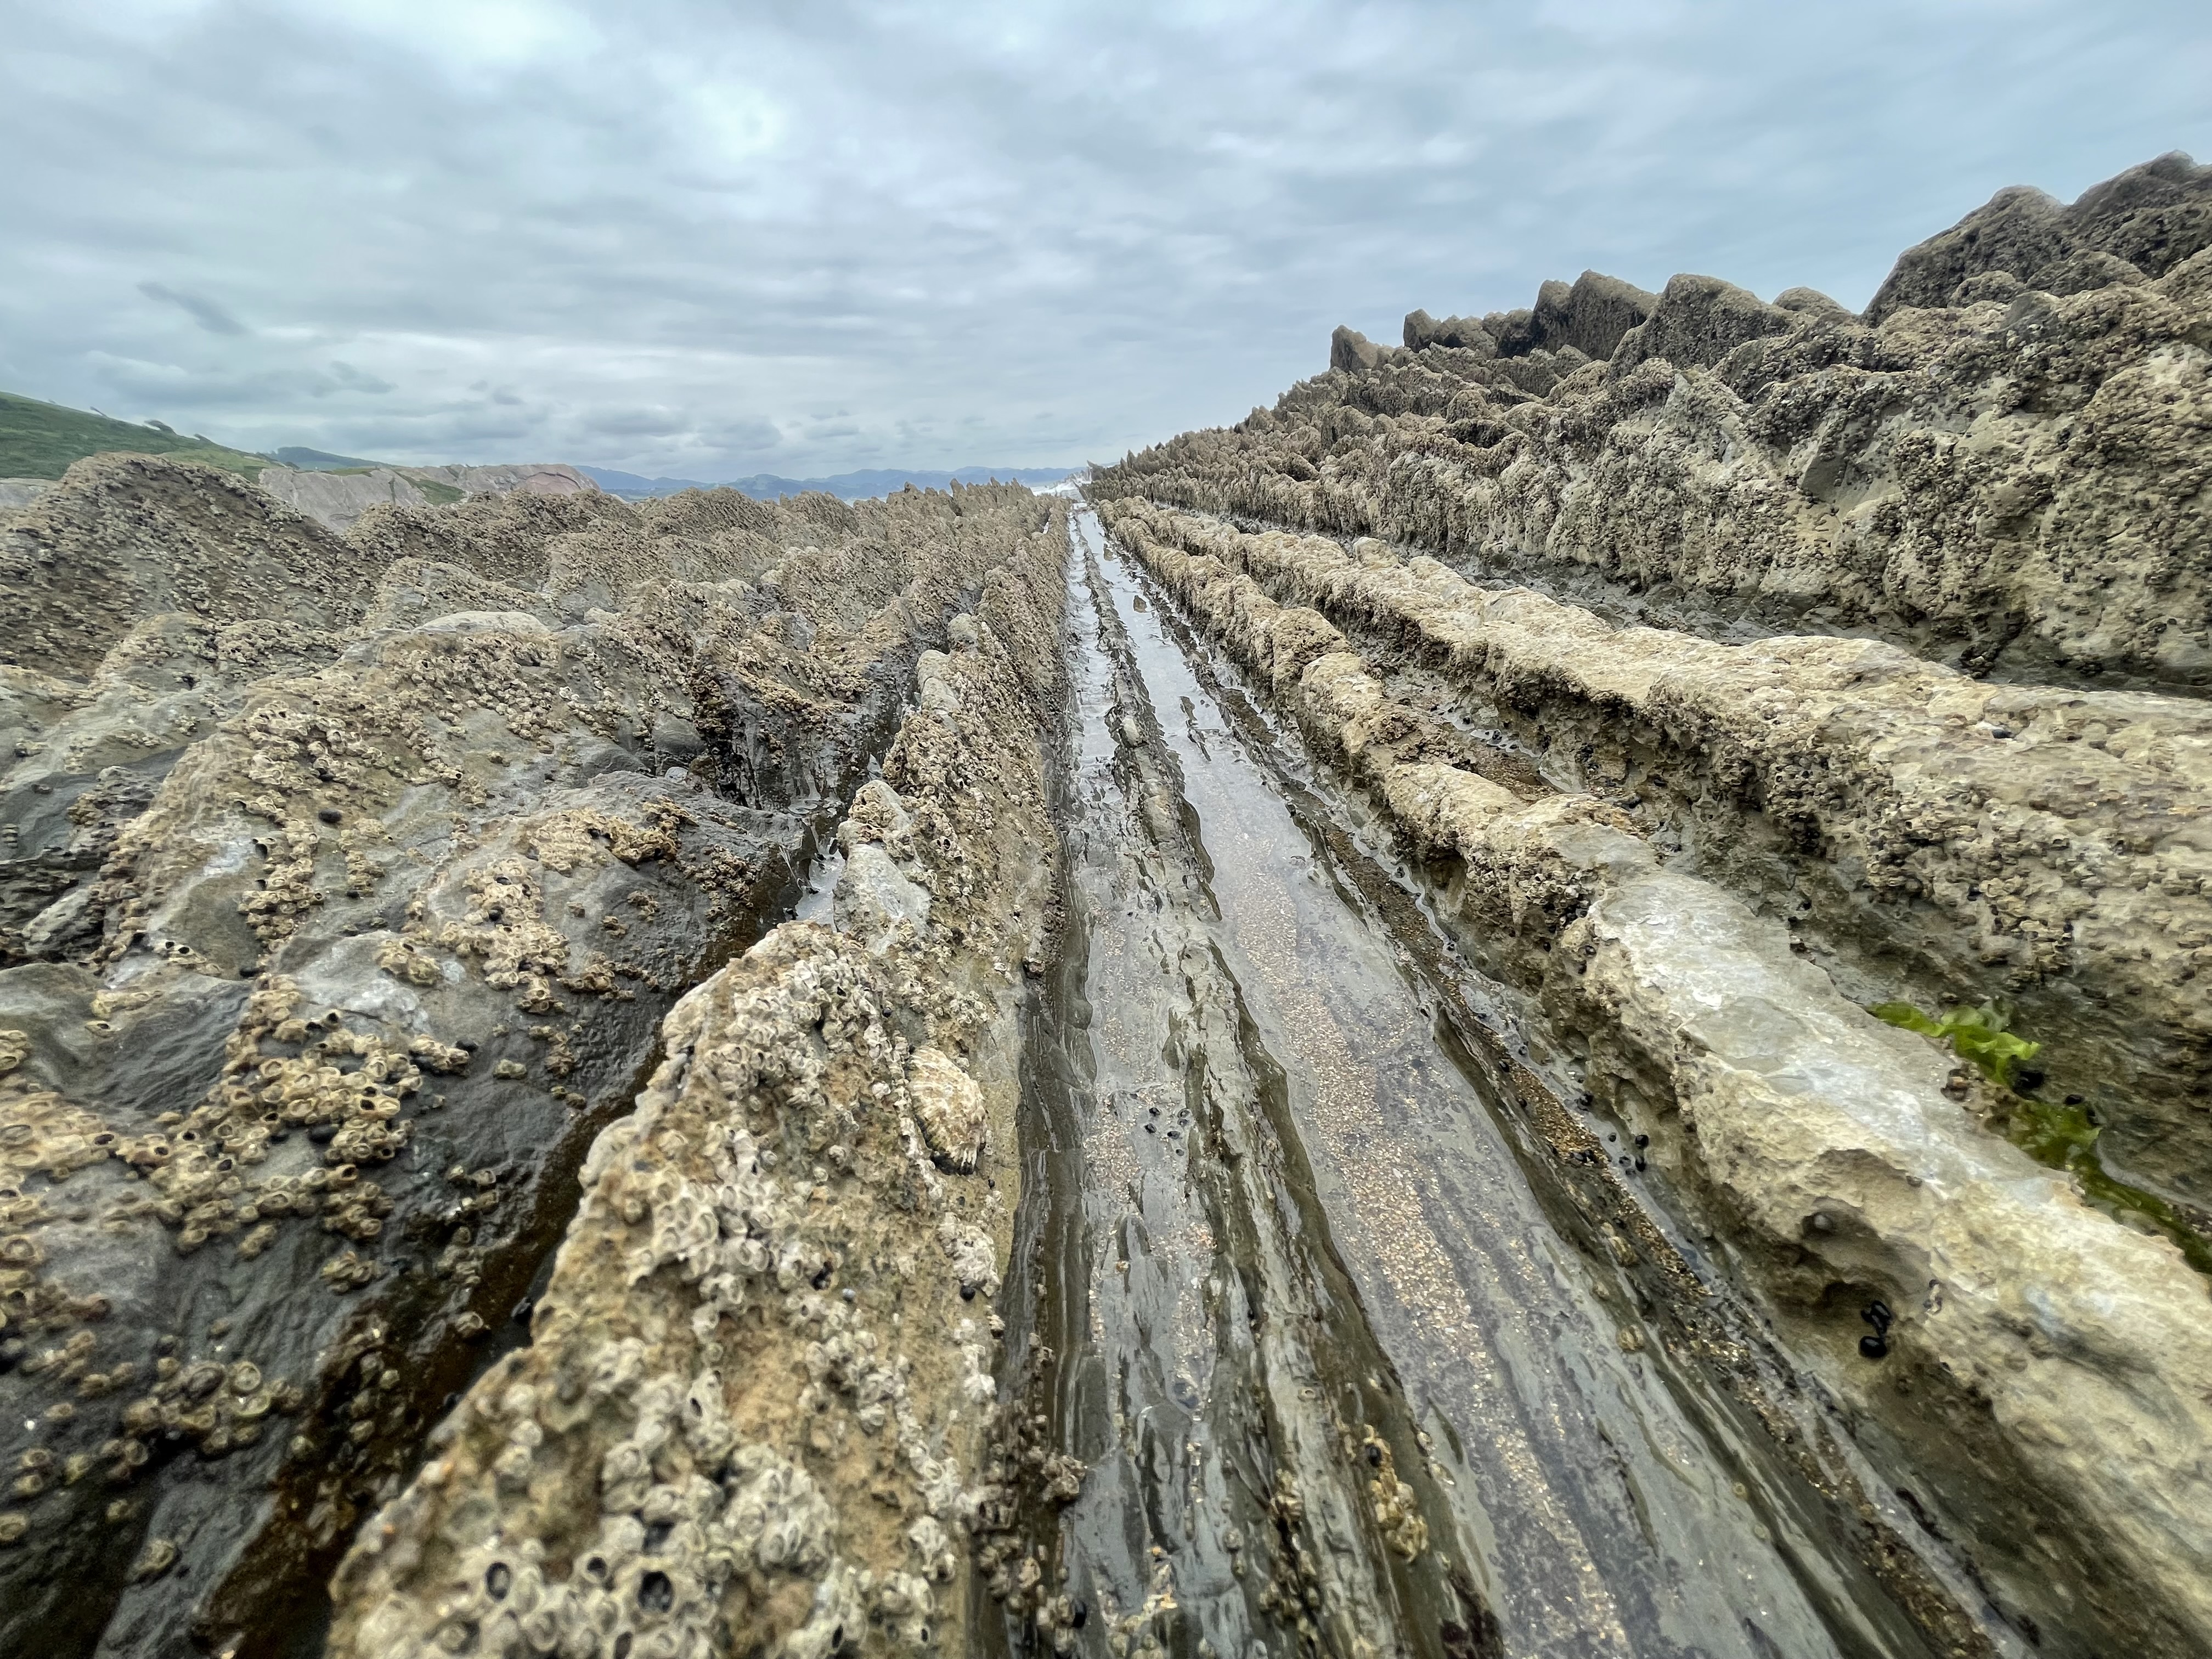 The Flysch